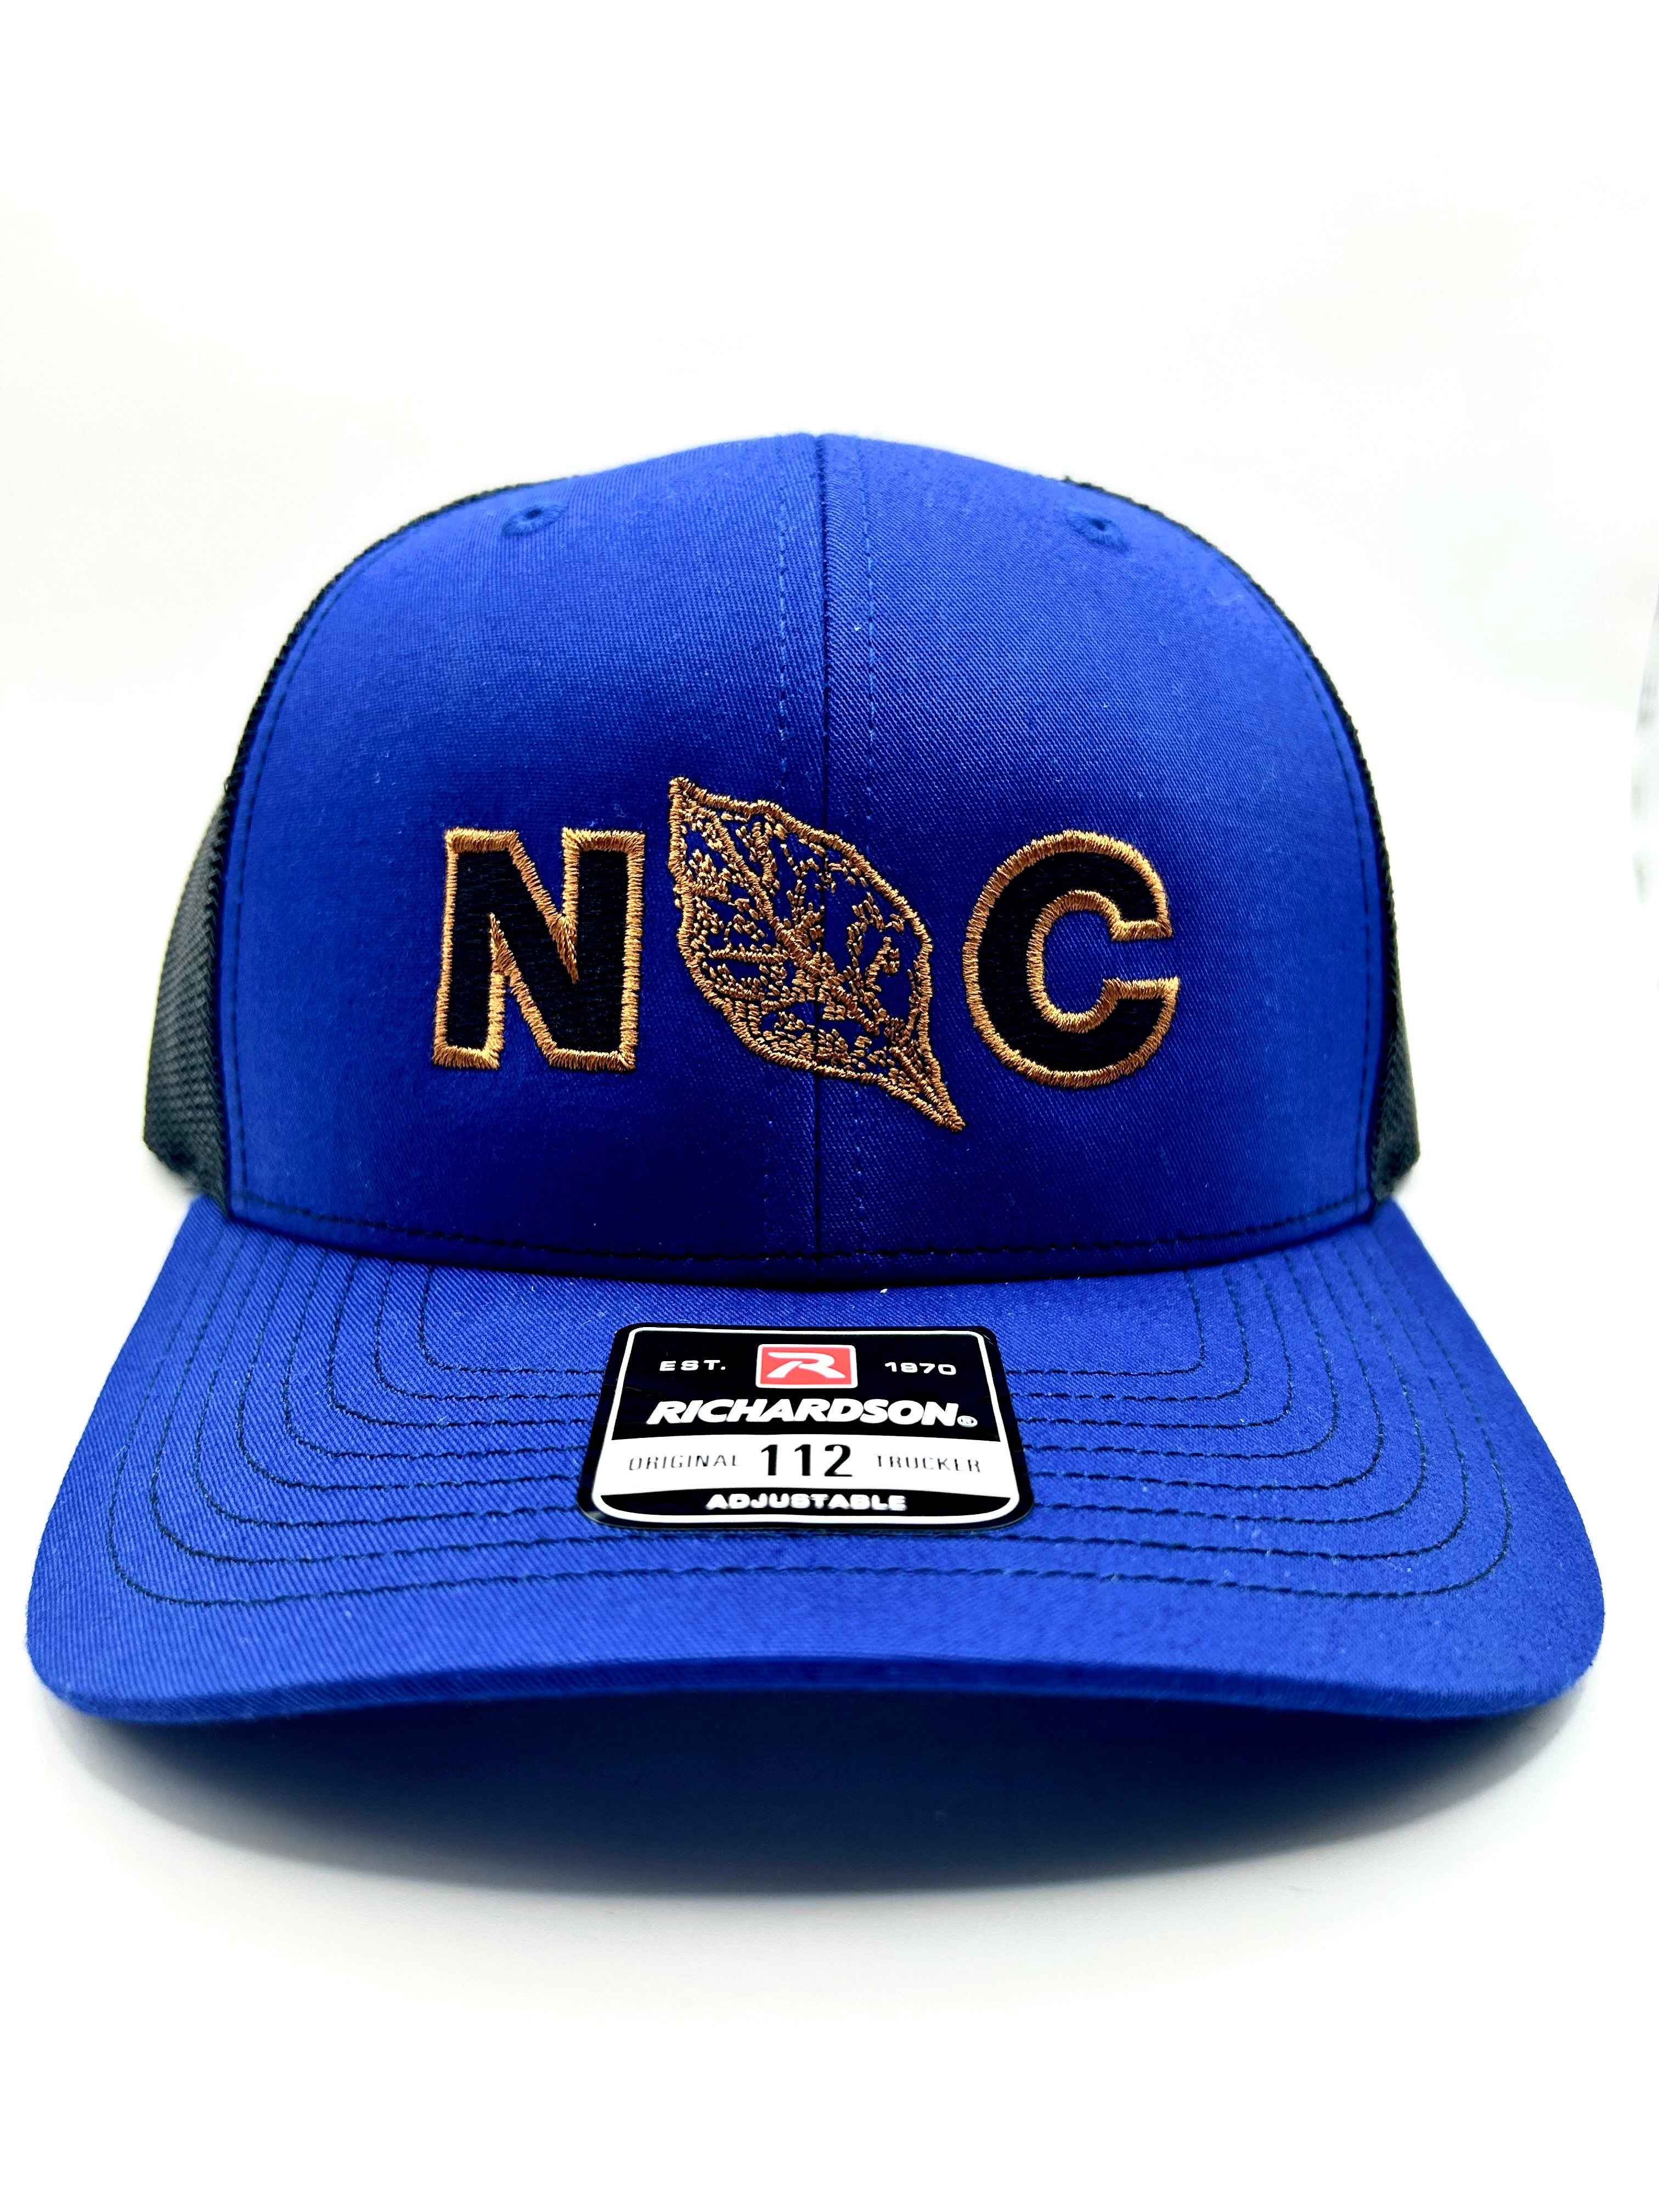 NC Tobacco Hat Embroidered